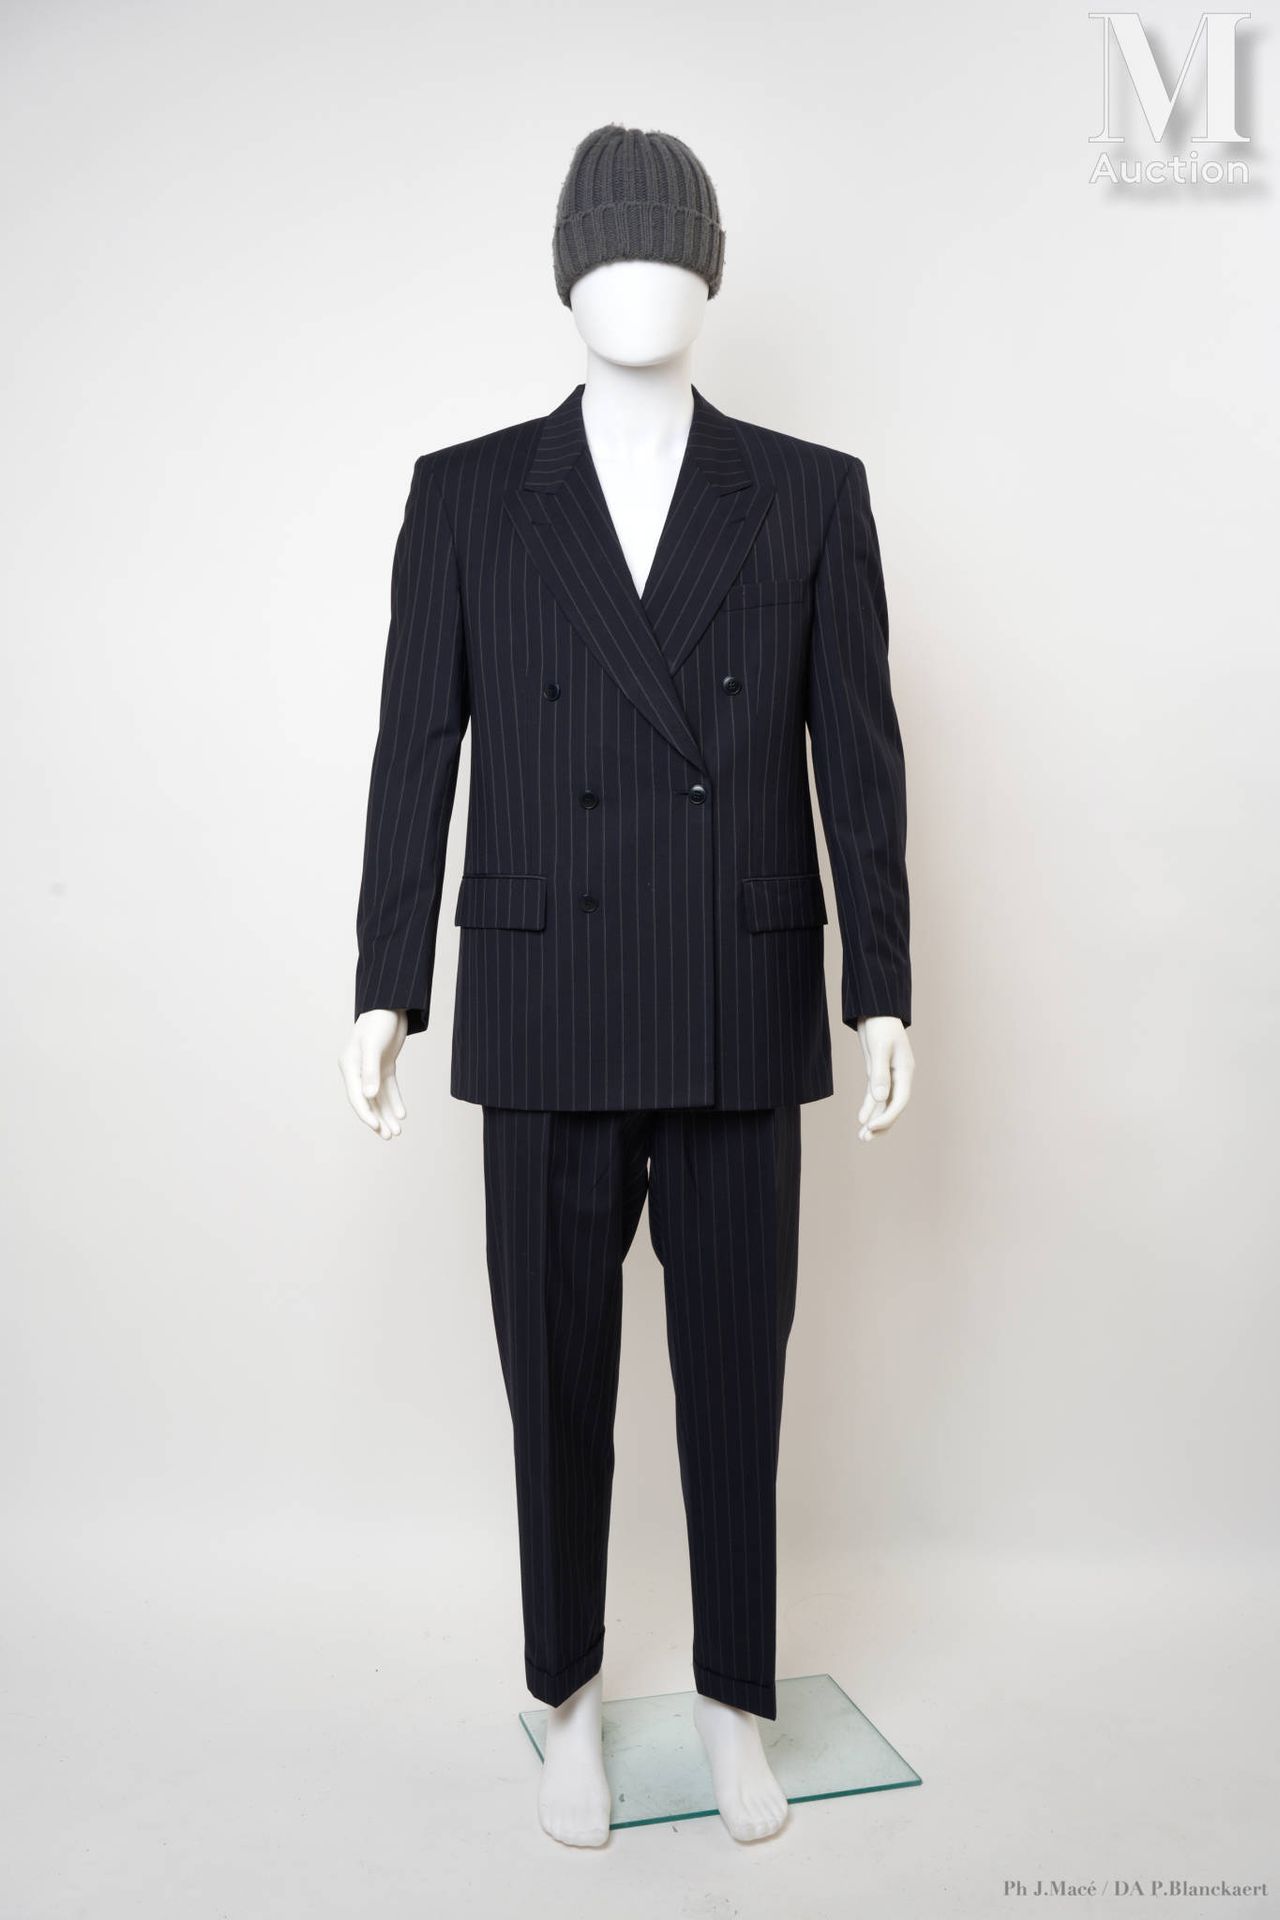 YVES SAINT LAURENT pour HOMME Abito
in lana navy con righe avorio: giacca e pant&hellip;